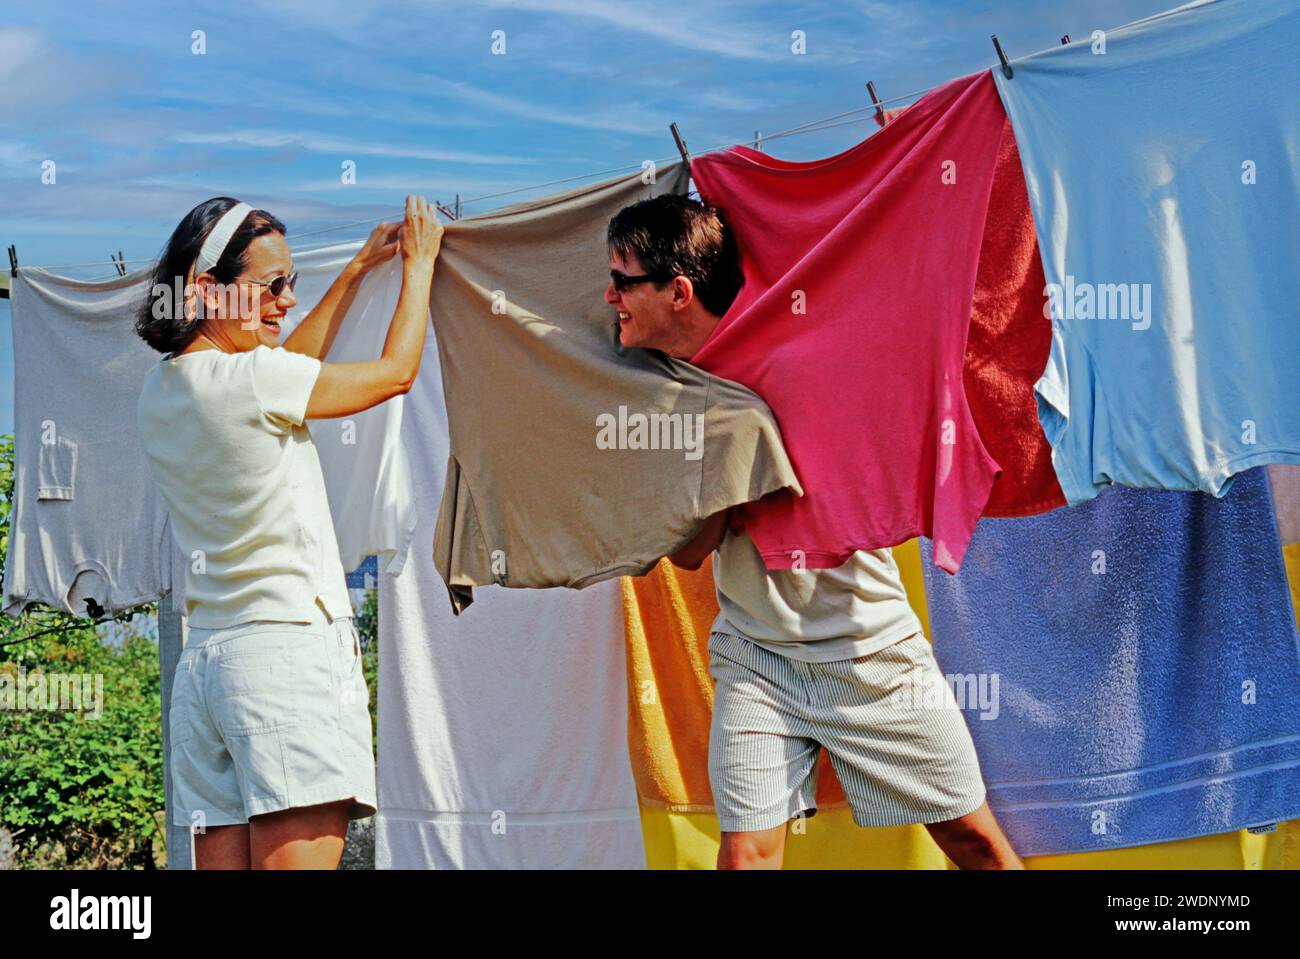 A couple fooling around lol hanging clean clothes outdoors on a clothesline Stock Photo